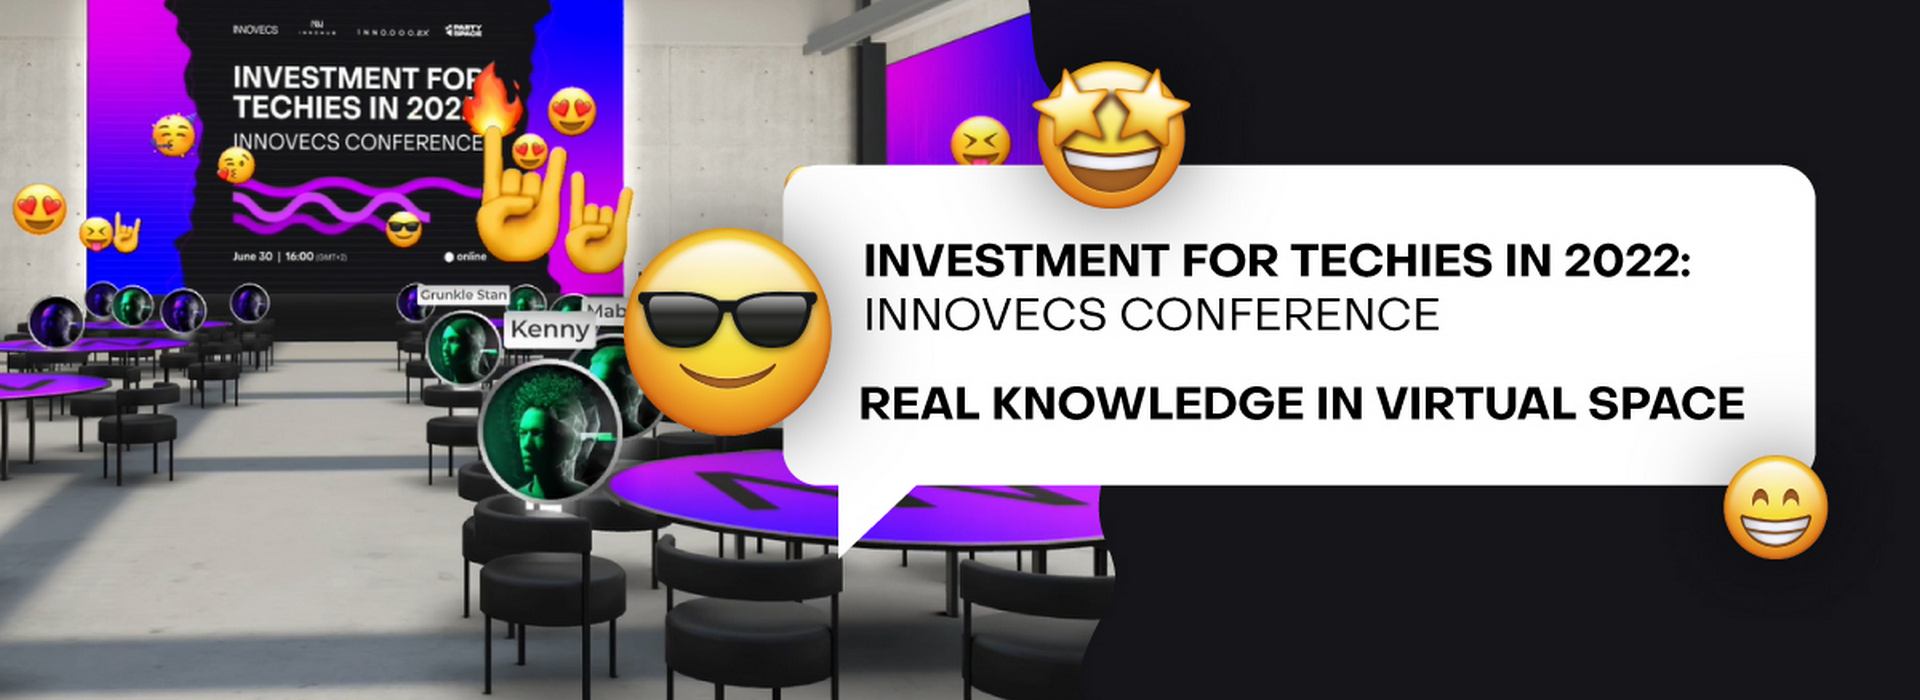 Investment For Techies in 2022: Innovecs Conference